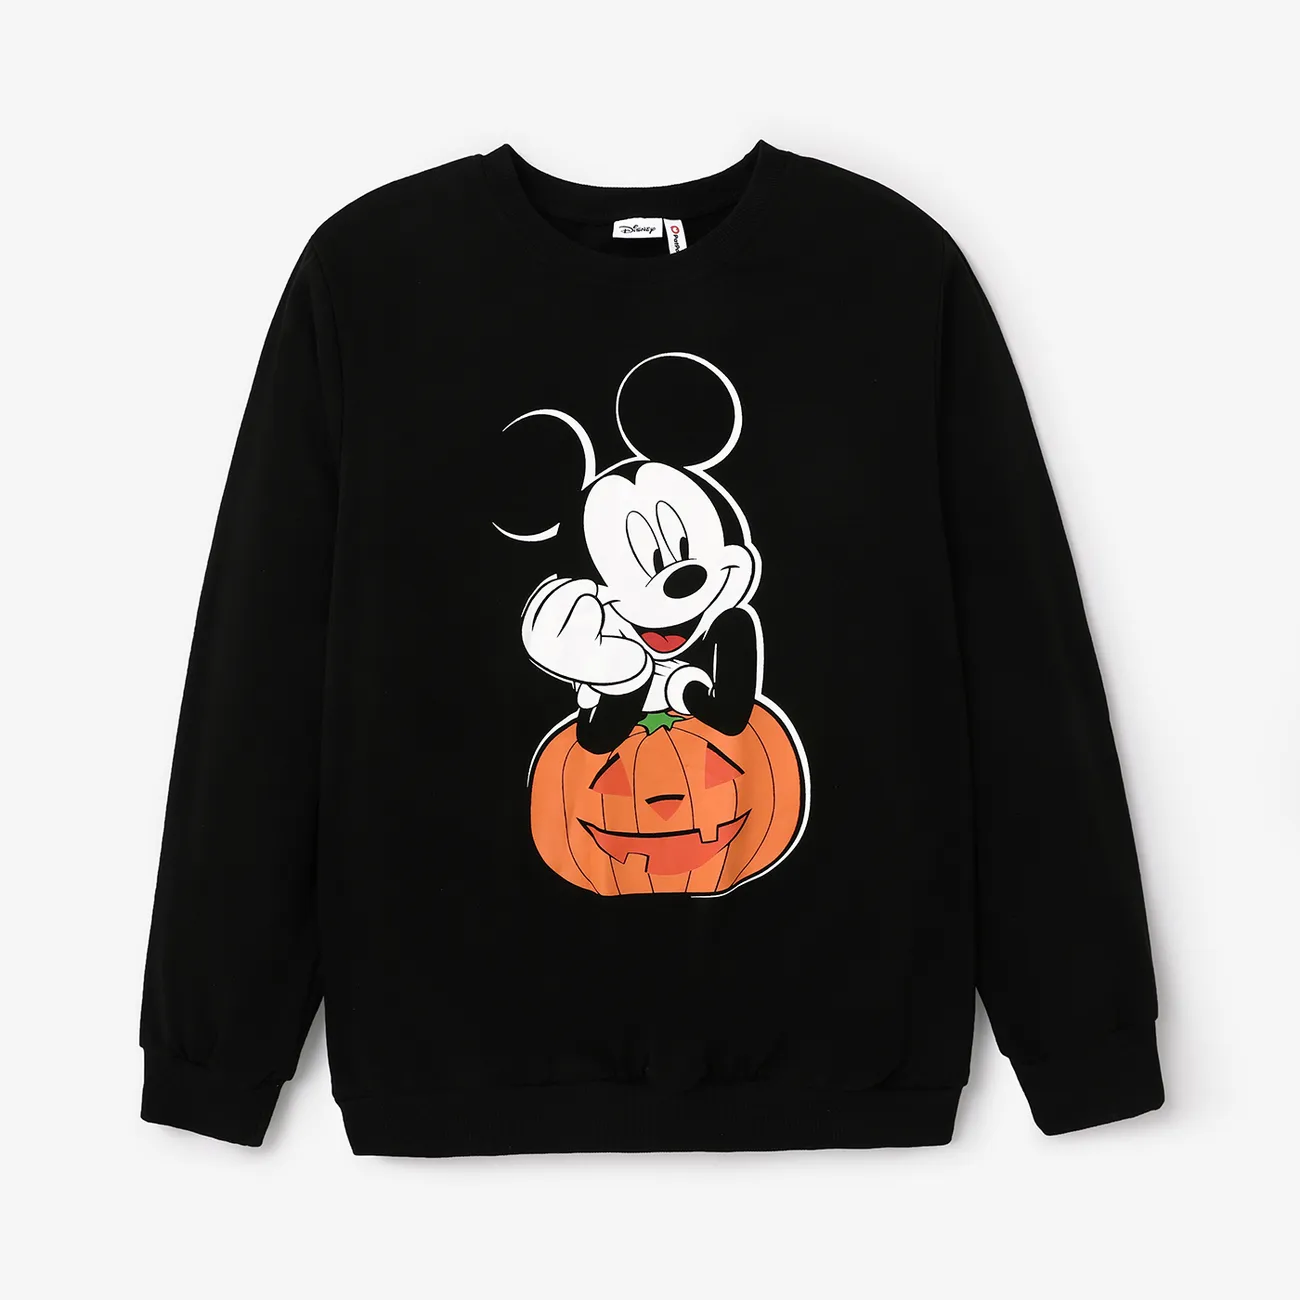 Disney Mickey and Minnie Halloween Family Matching Character Pattern Crew Neck Top  Black big image 1